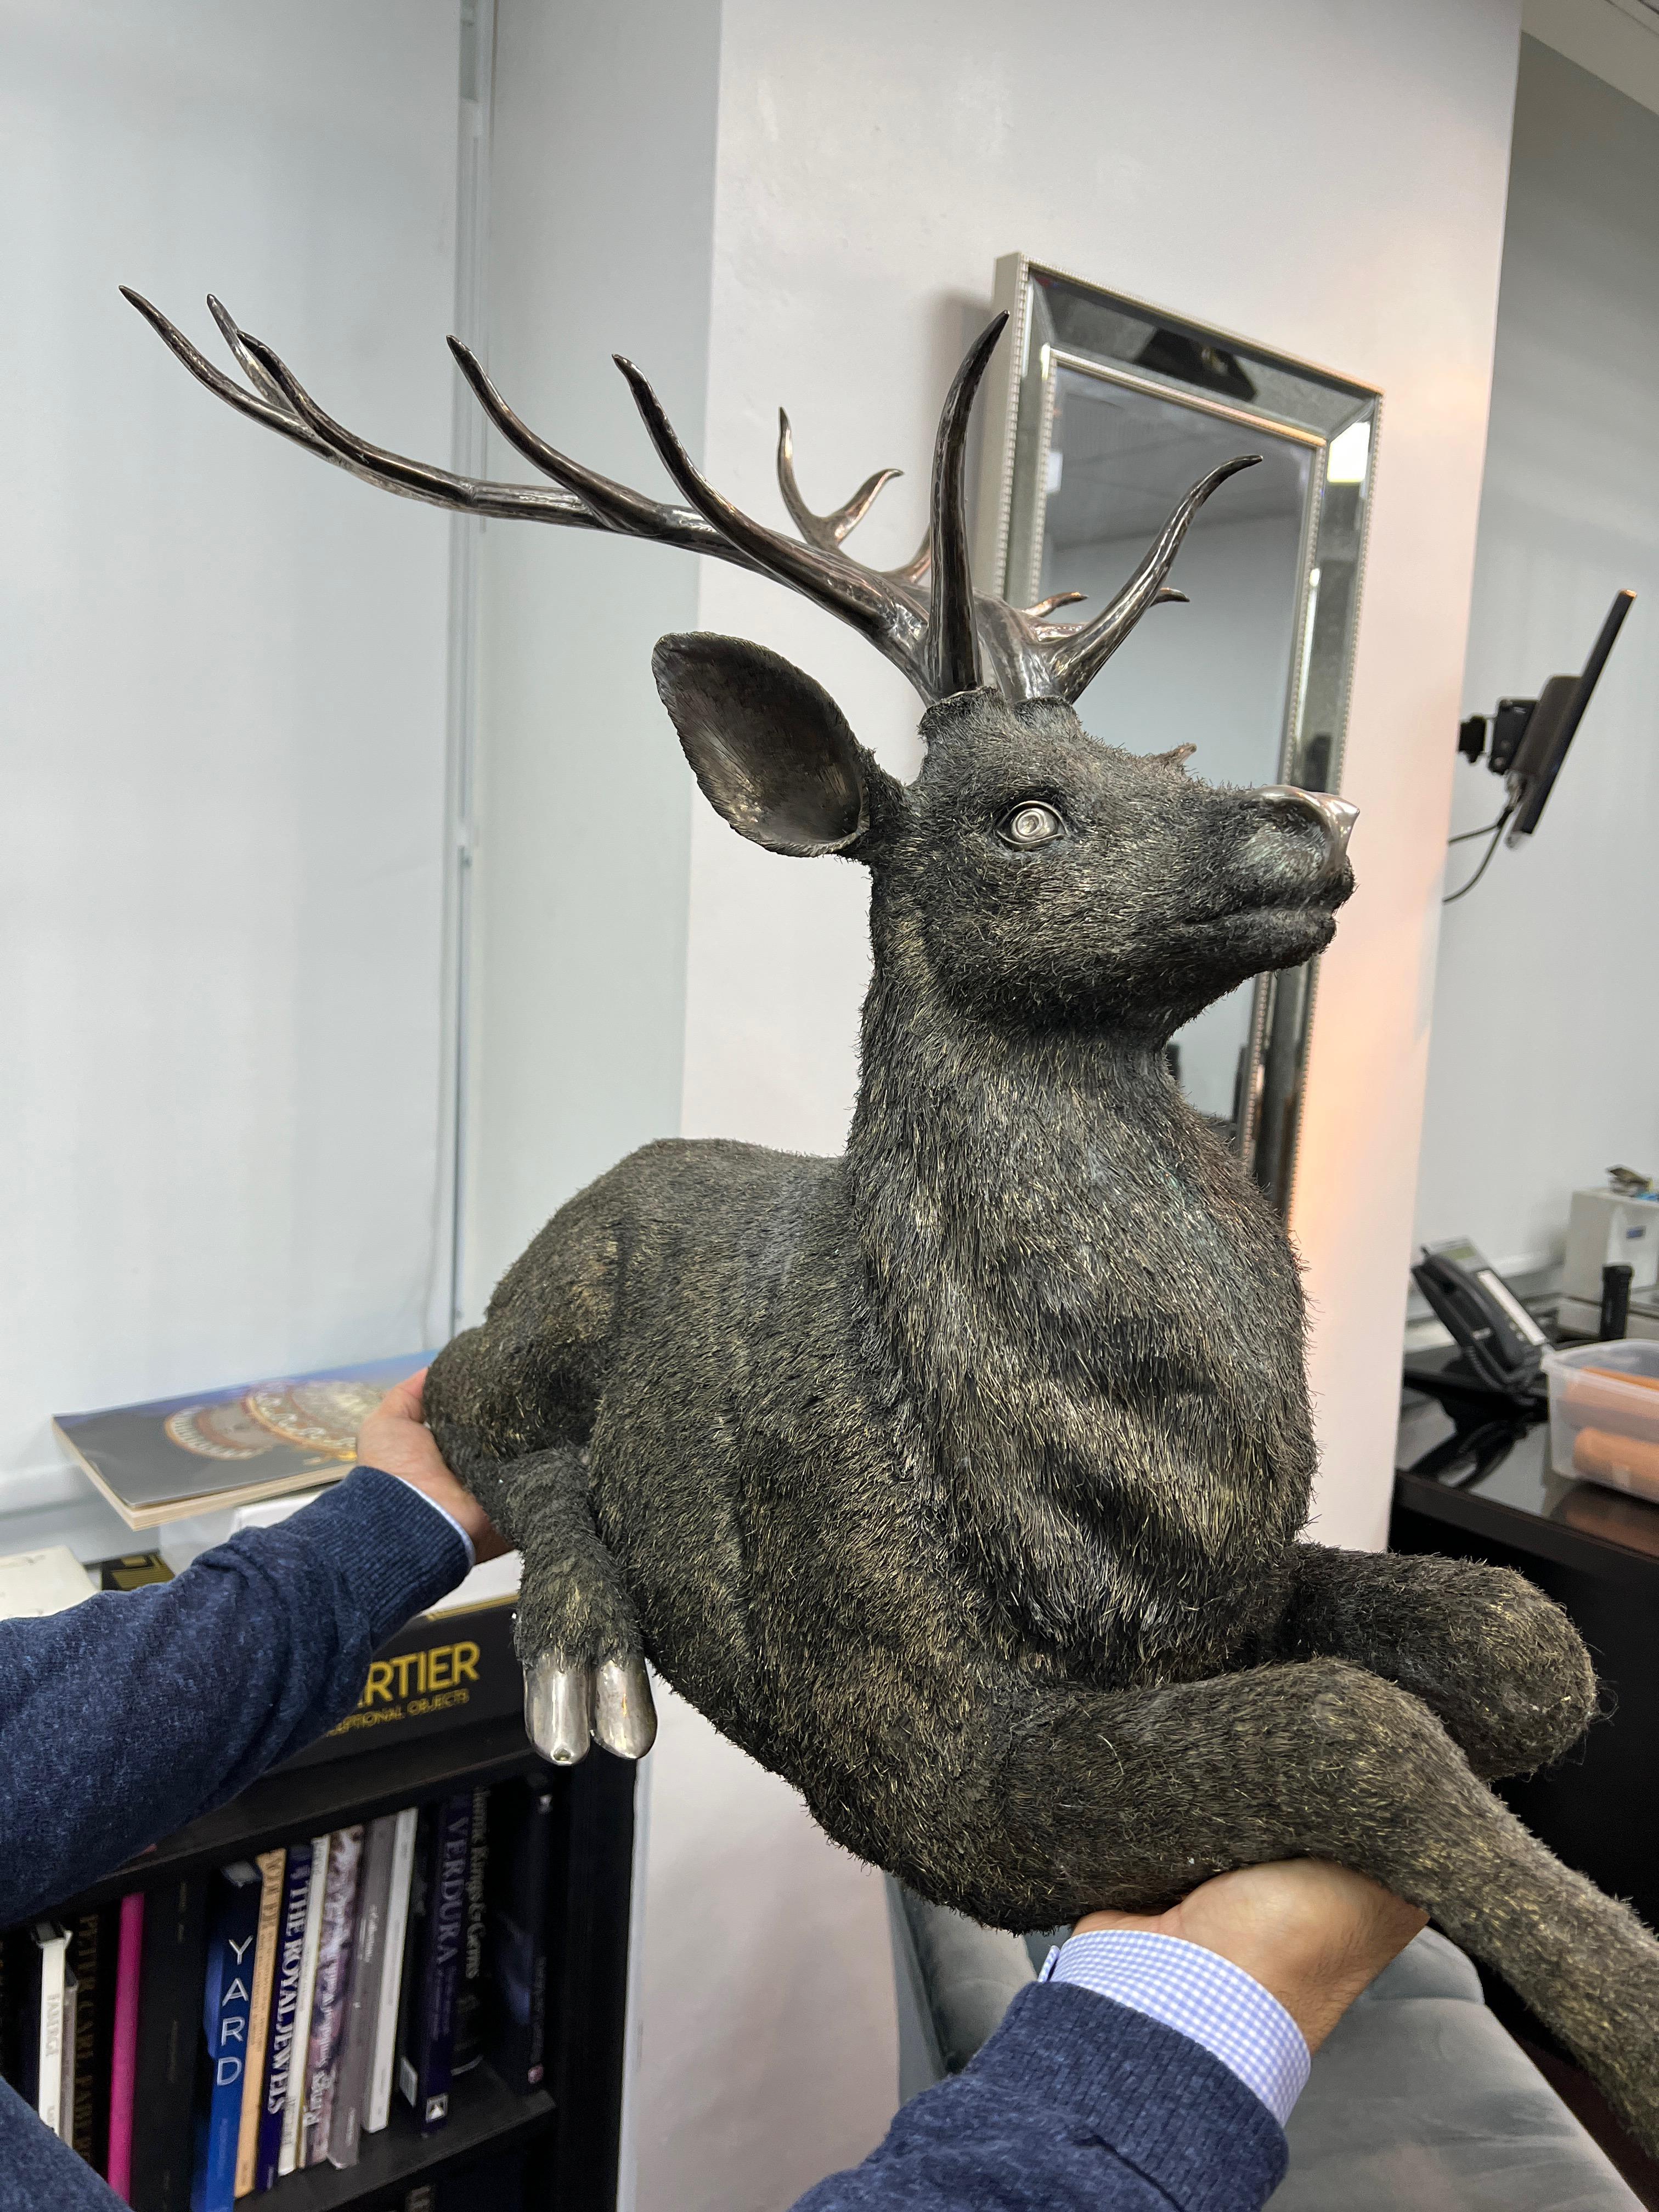 skyfall stag statue